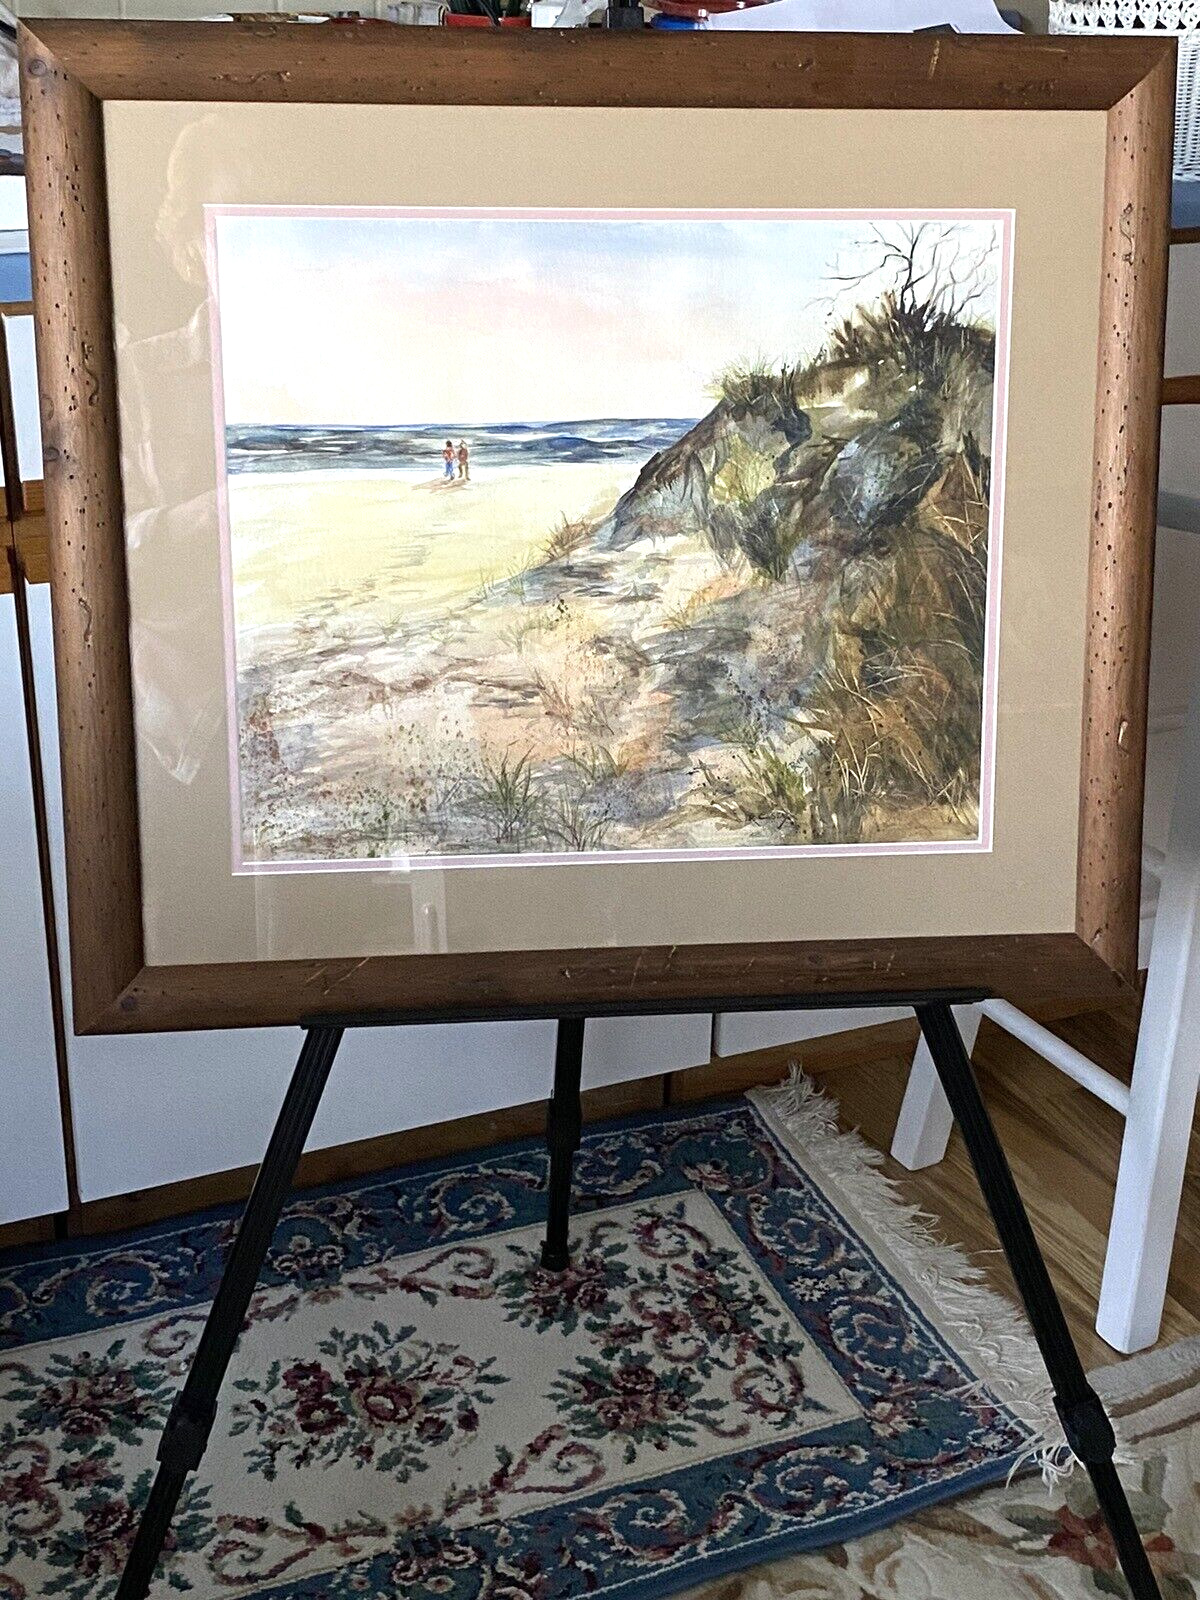 WORMY CHESTNUT PICTURE FRAME -w- COUPLE ON BEACH, BEAUTIFUL WATERCOLOR PRE-OWNED